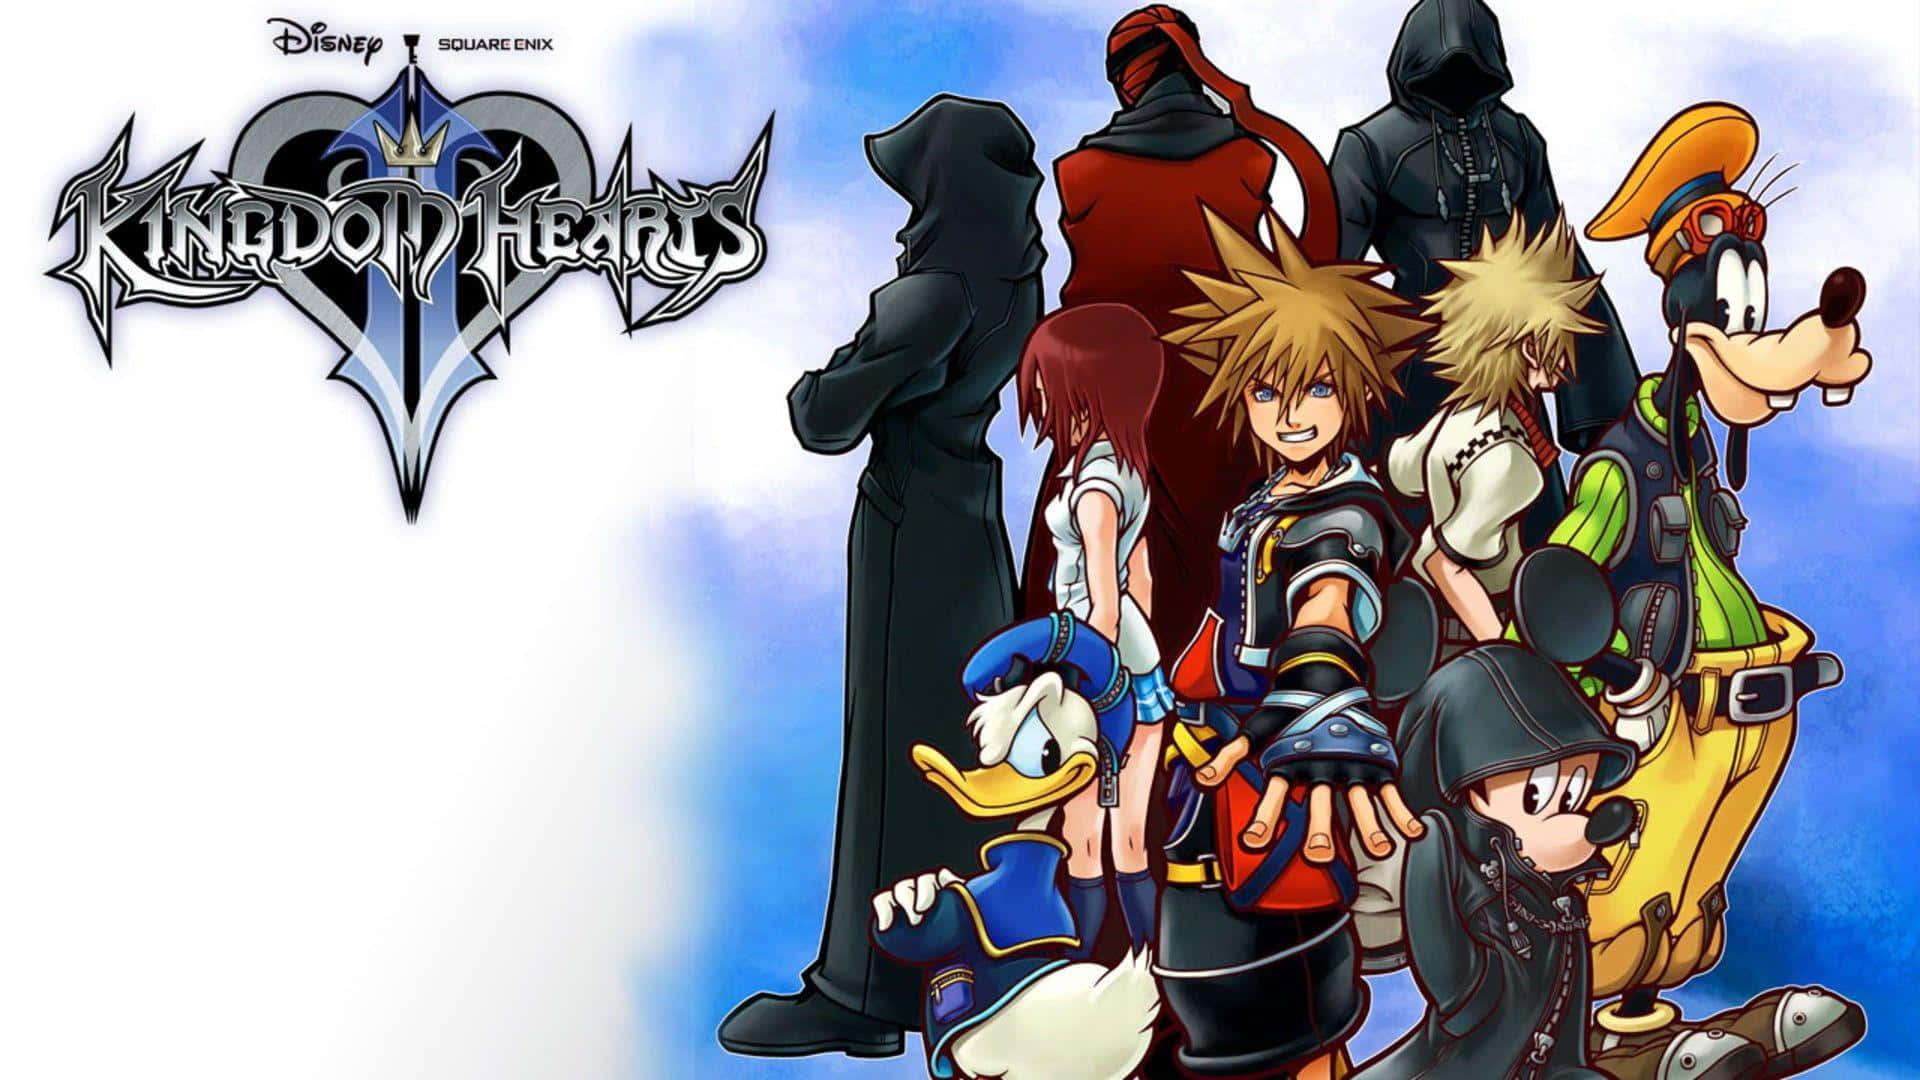 Sora standing strong in a Kingdom Hearts adventure Wallpaper